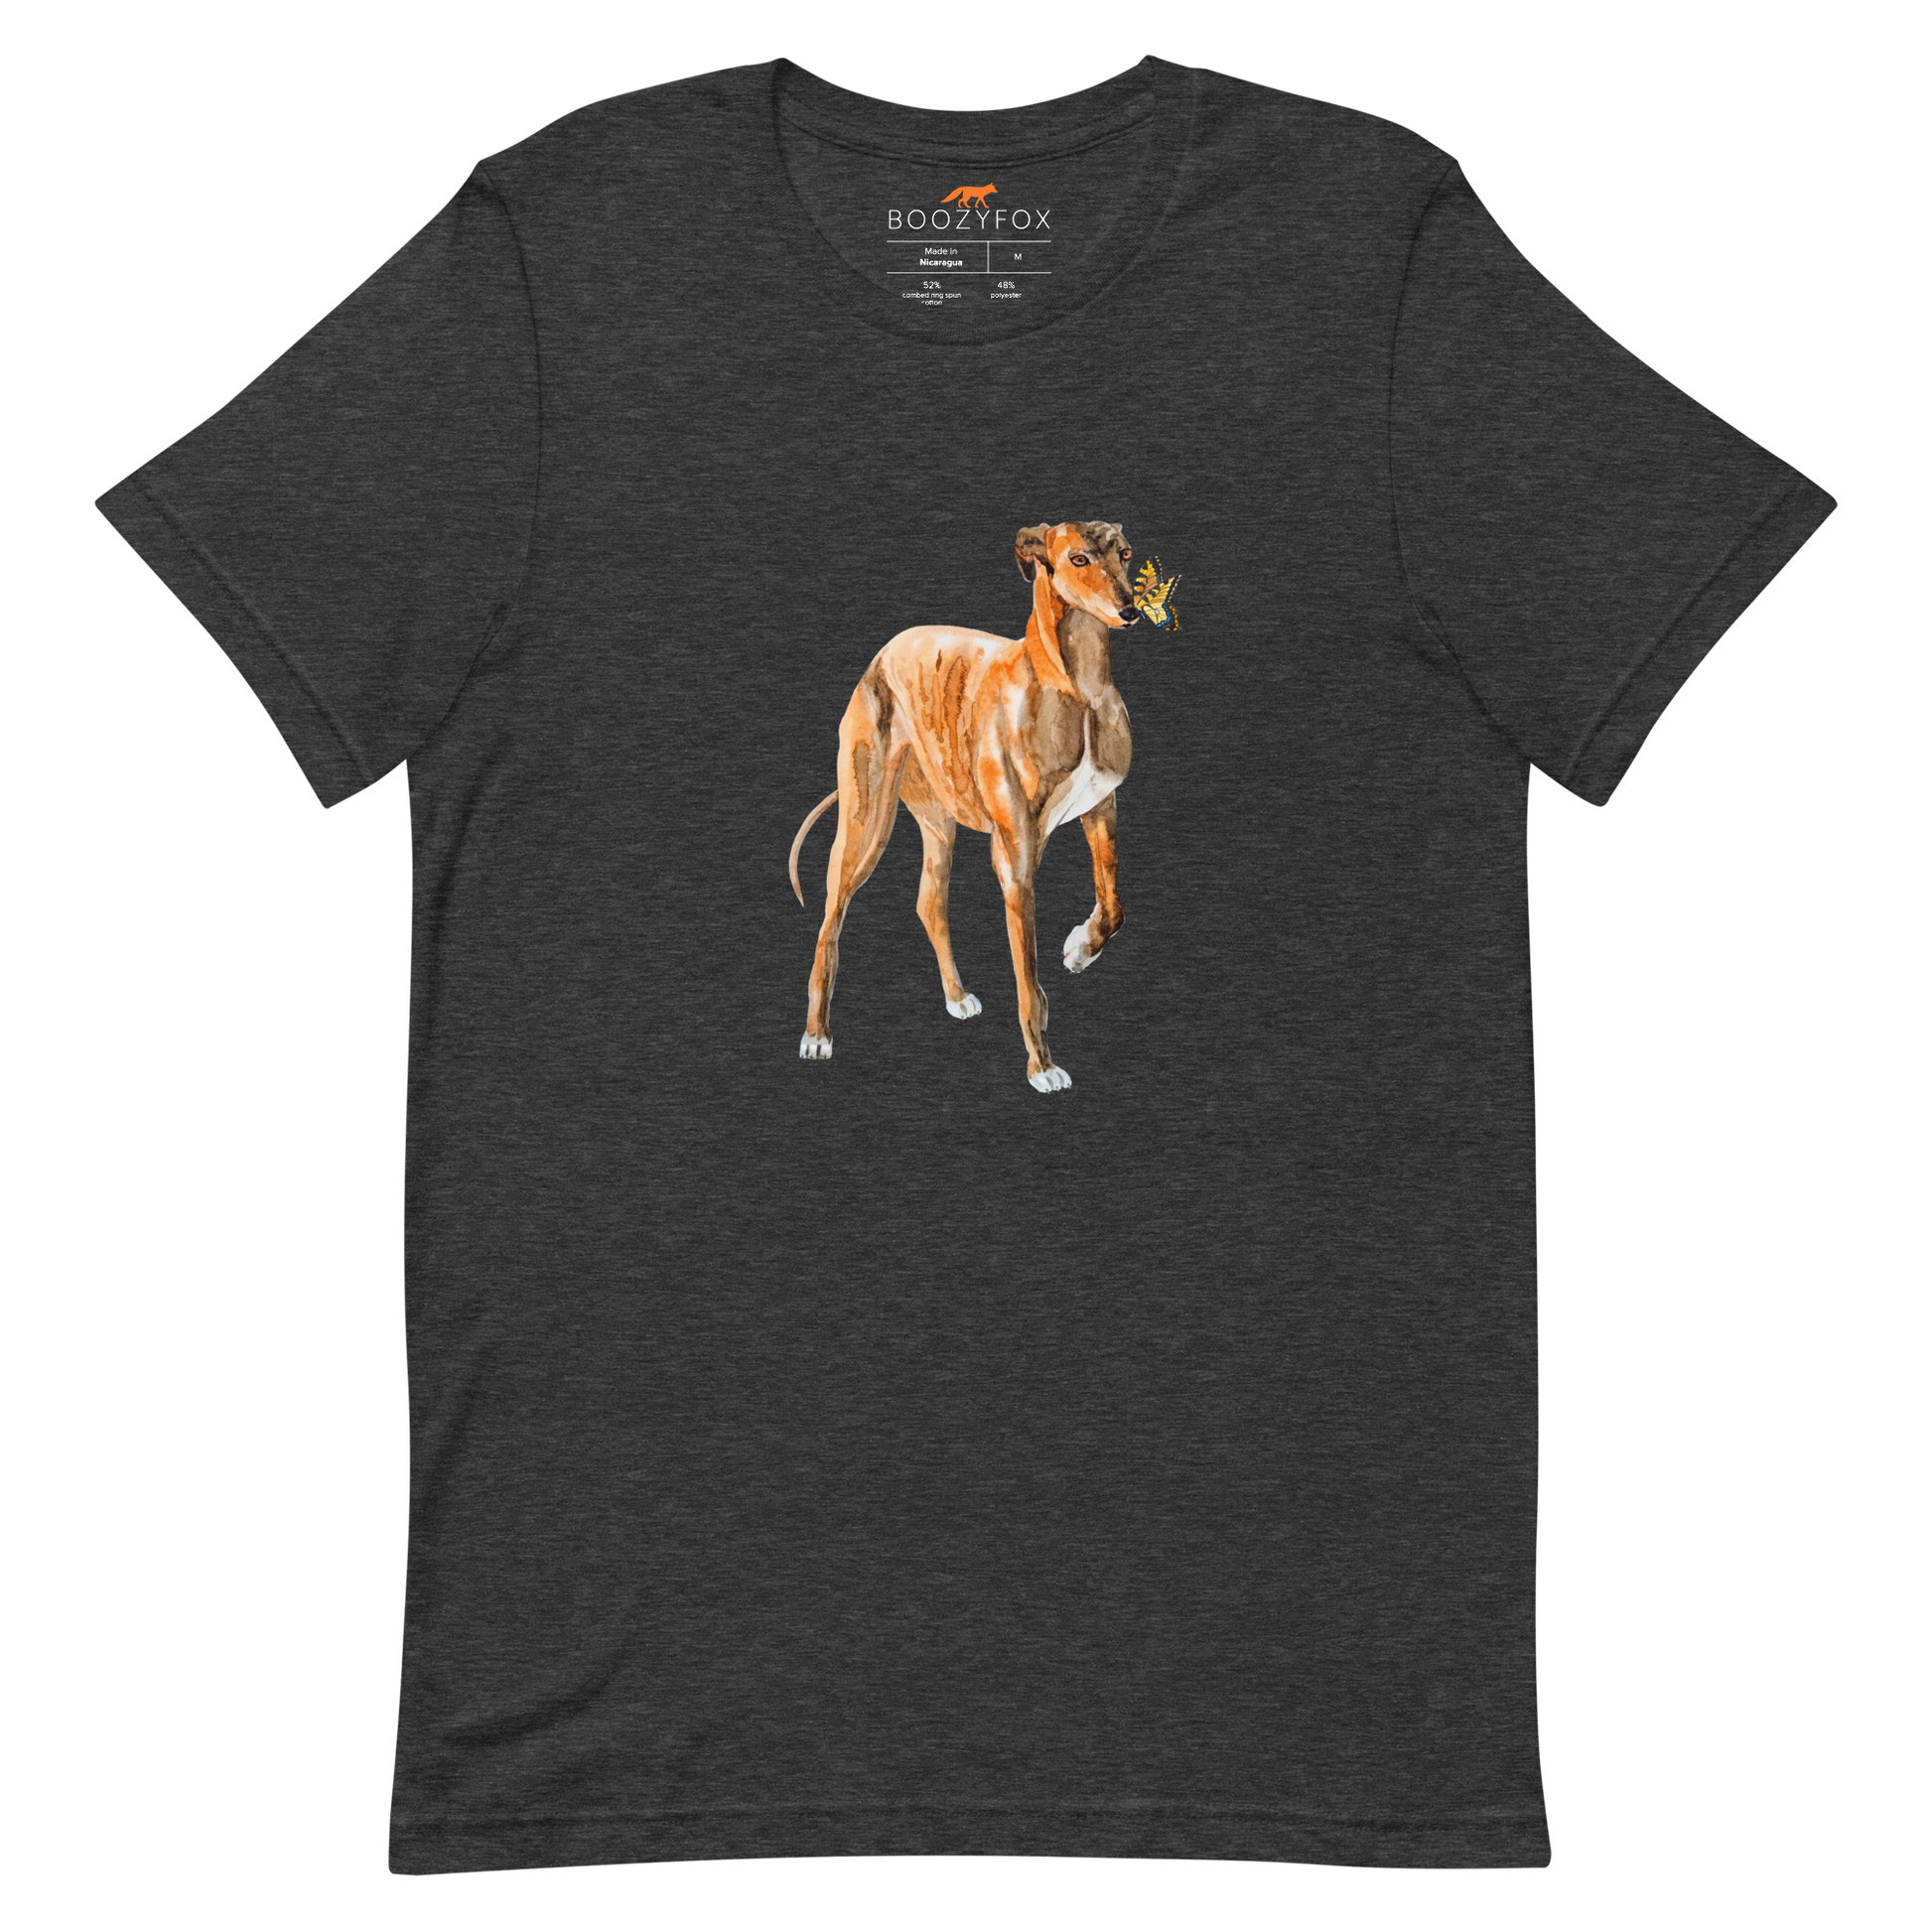 Dark Grey Heather Premium Greyhound T-Shirt featuring an adorable Greyhound And Butterfly graphic on the chest - Cute Graphic Greyhound Tees - Boozy Fox